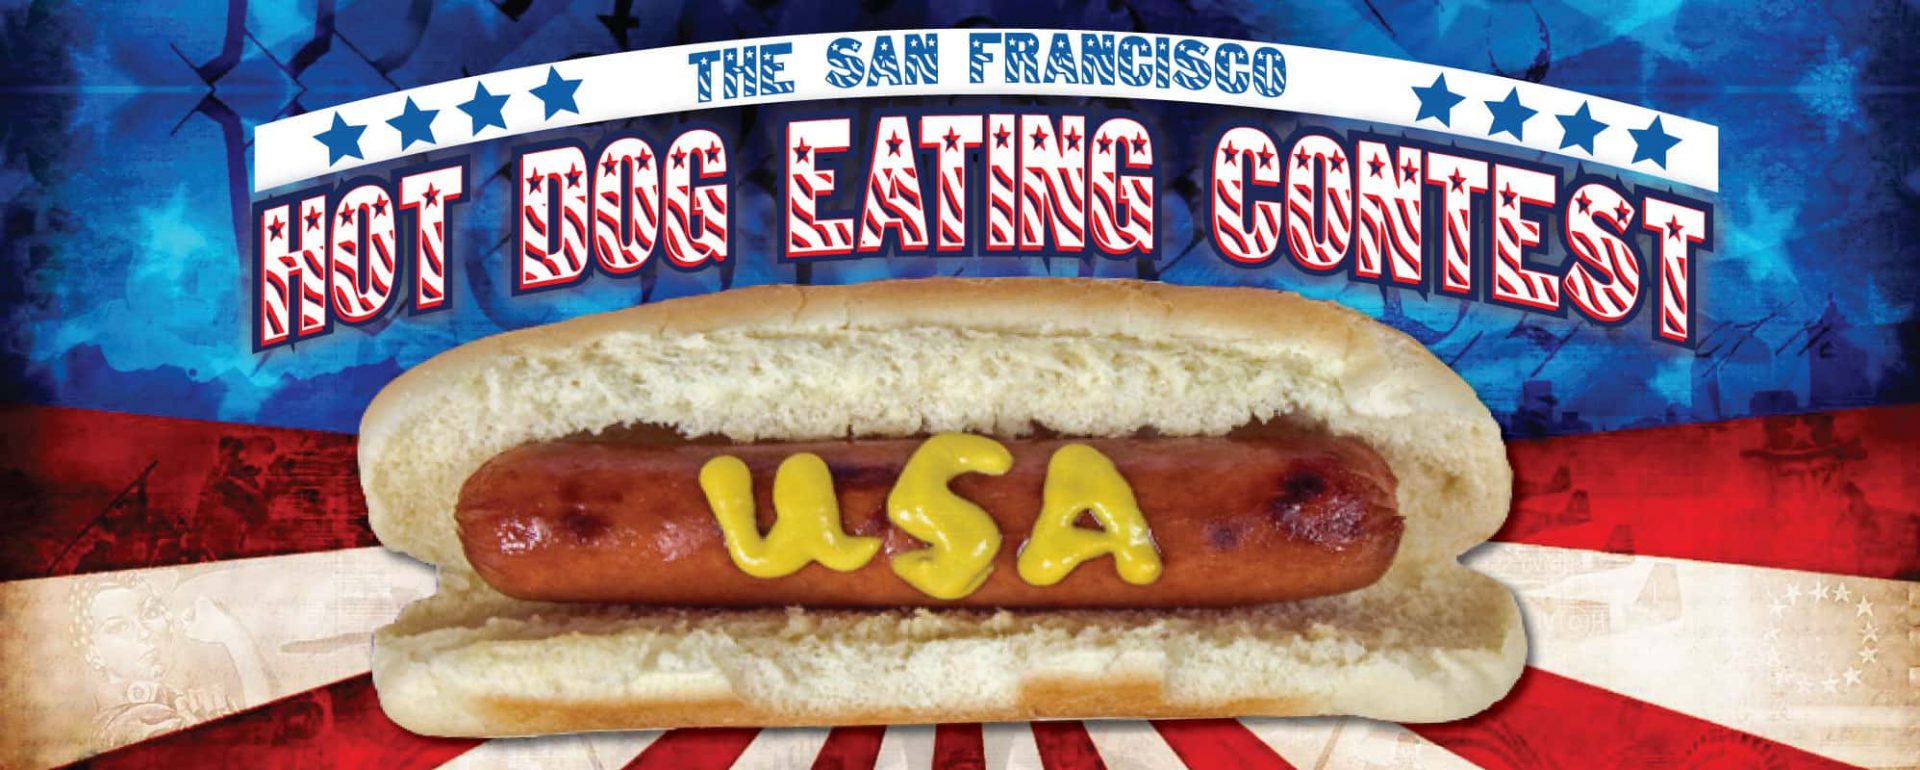 SF Hot Dog Eating Contest